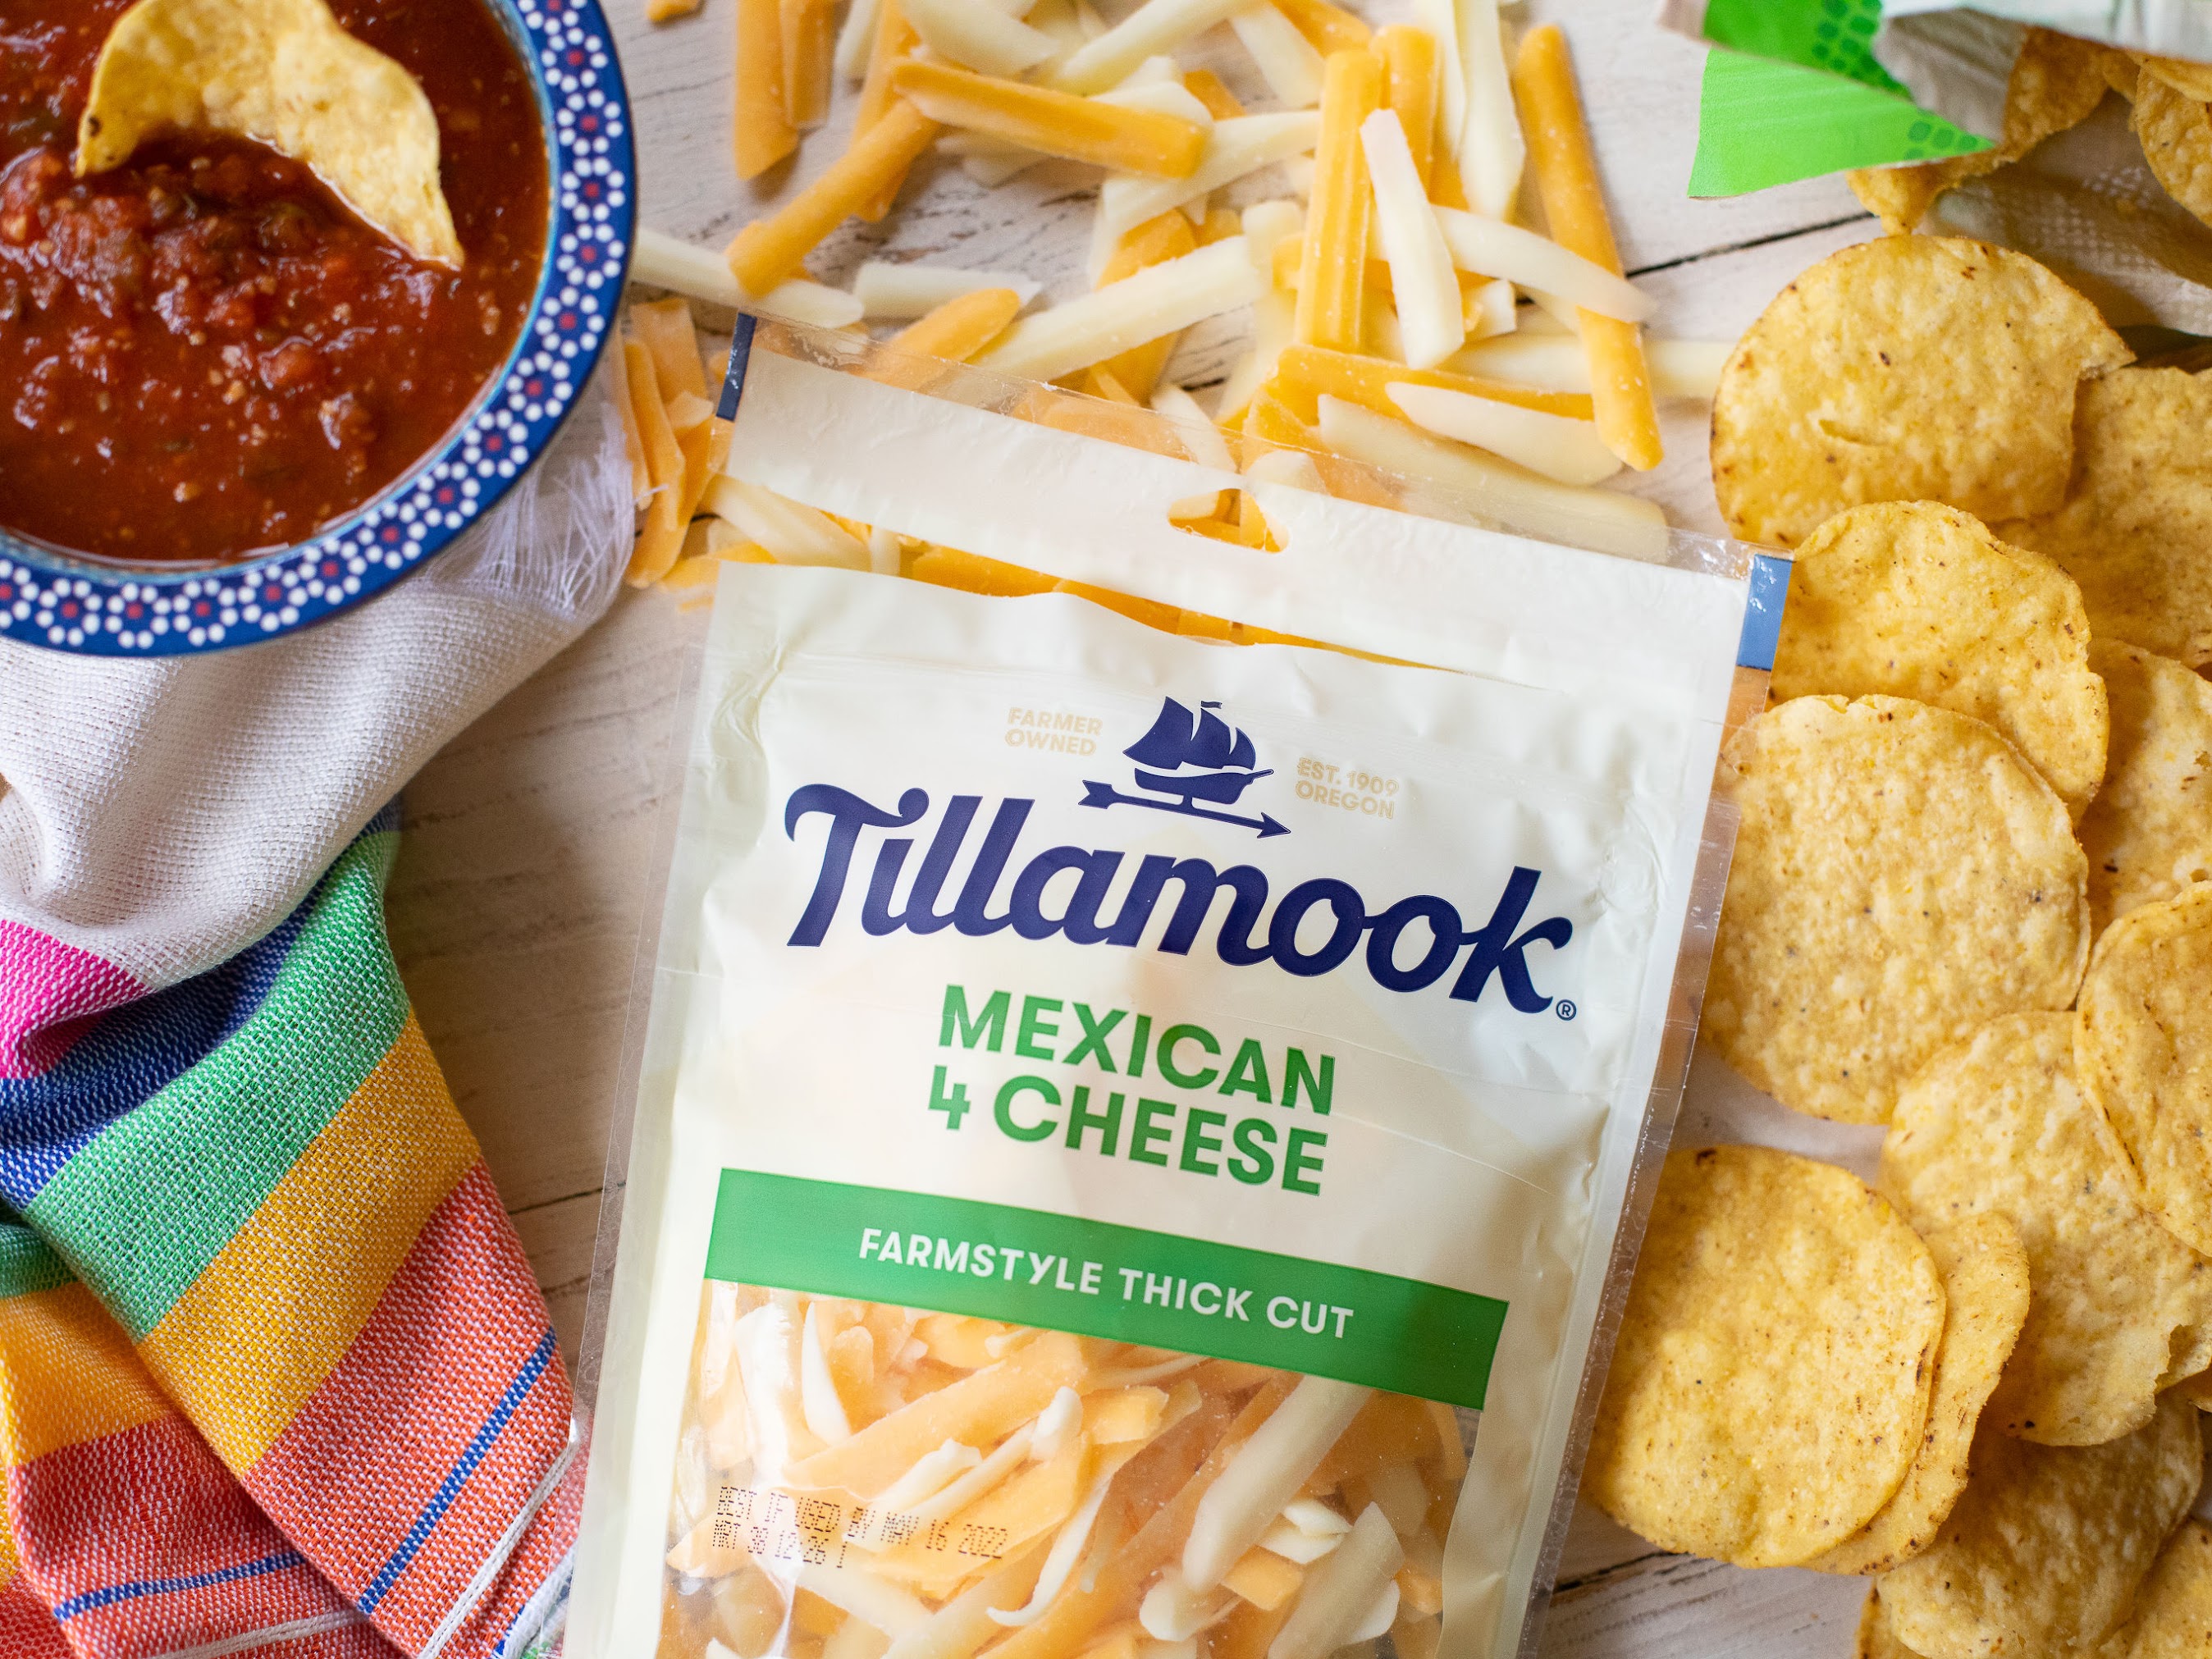 Get Tillamook Cheese For Just $3.50 At Publix